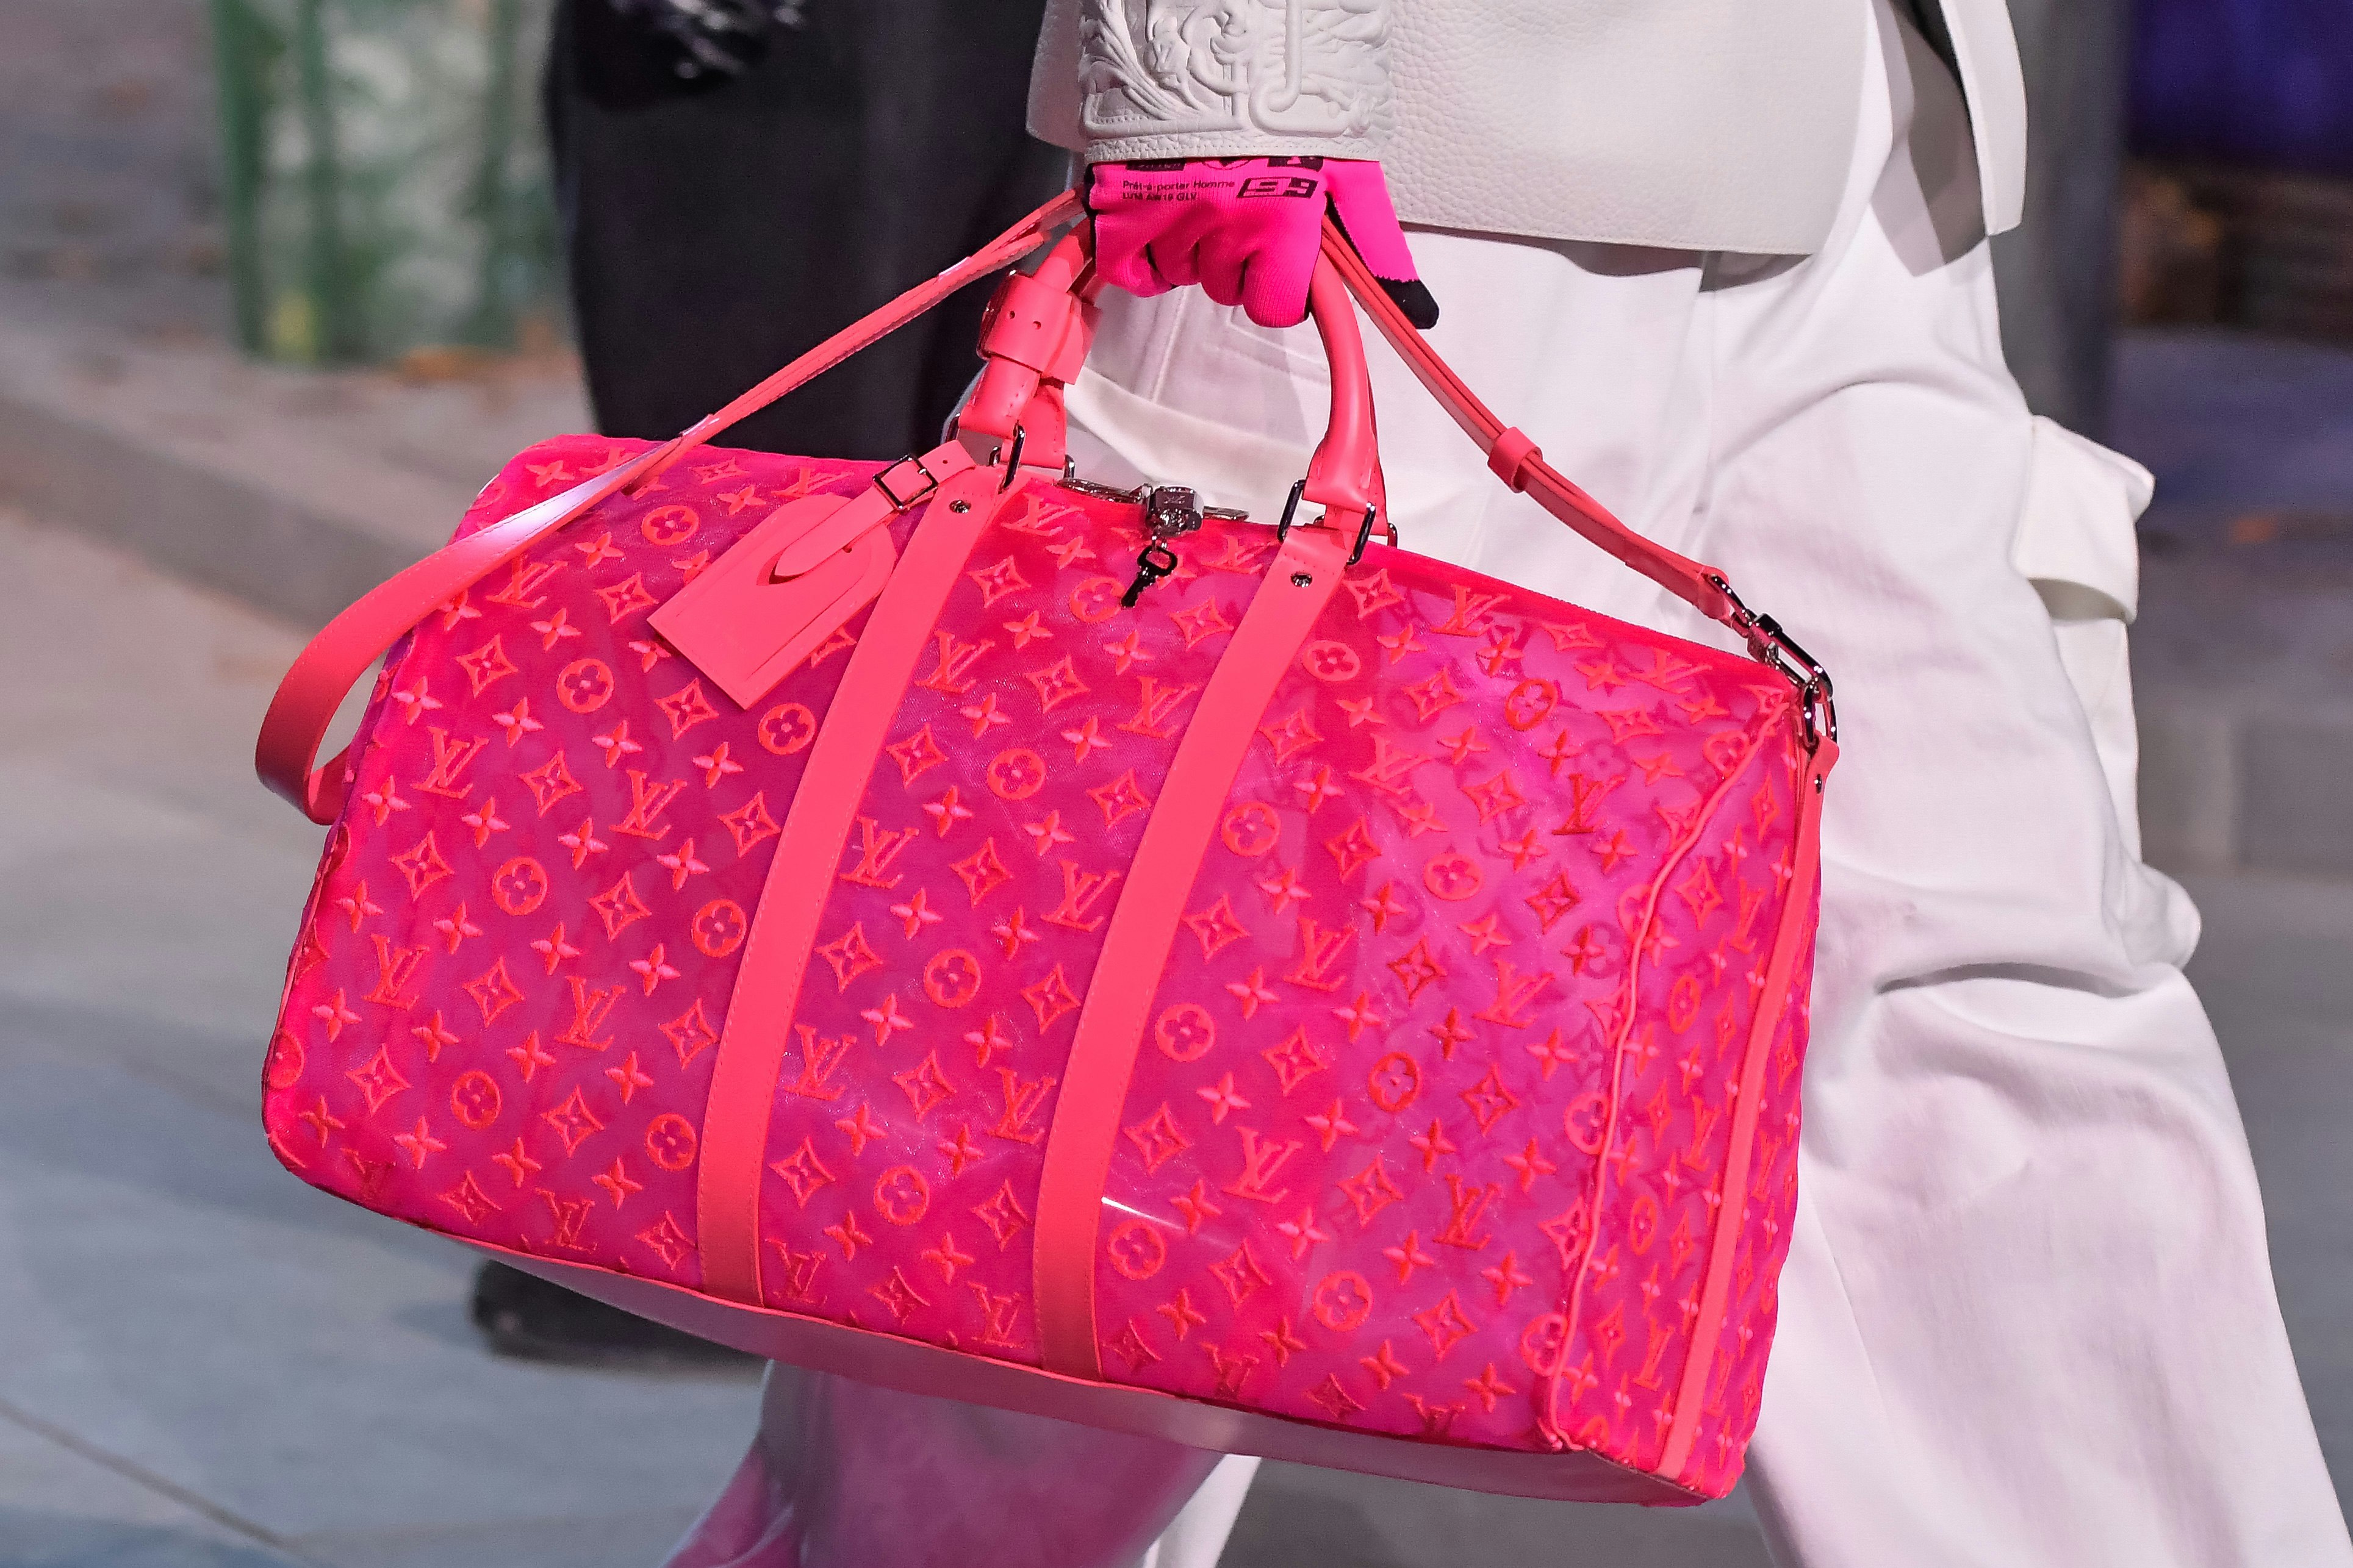 This Louis Vuitton AW19 Bag By Virgil Abloh Was Made For The